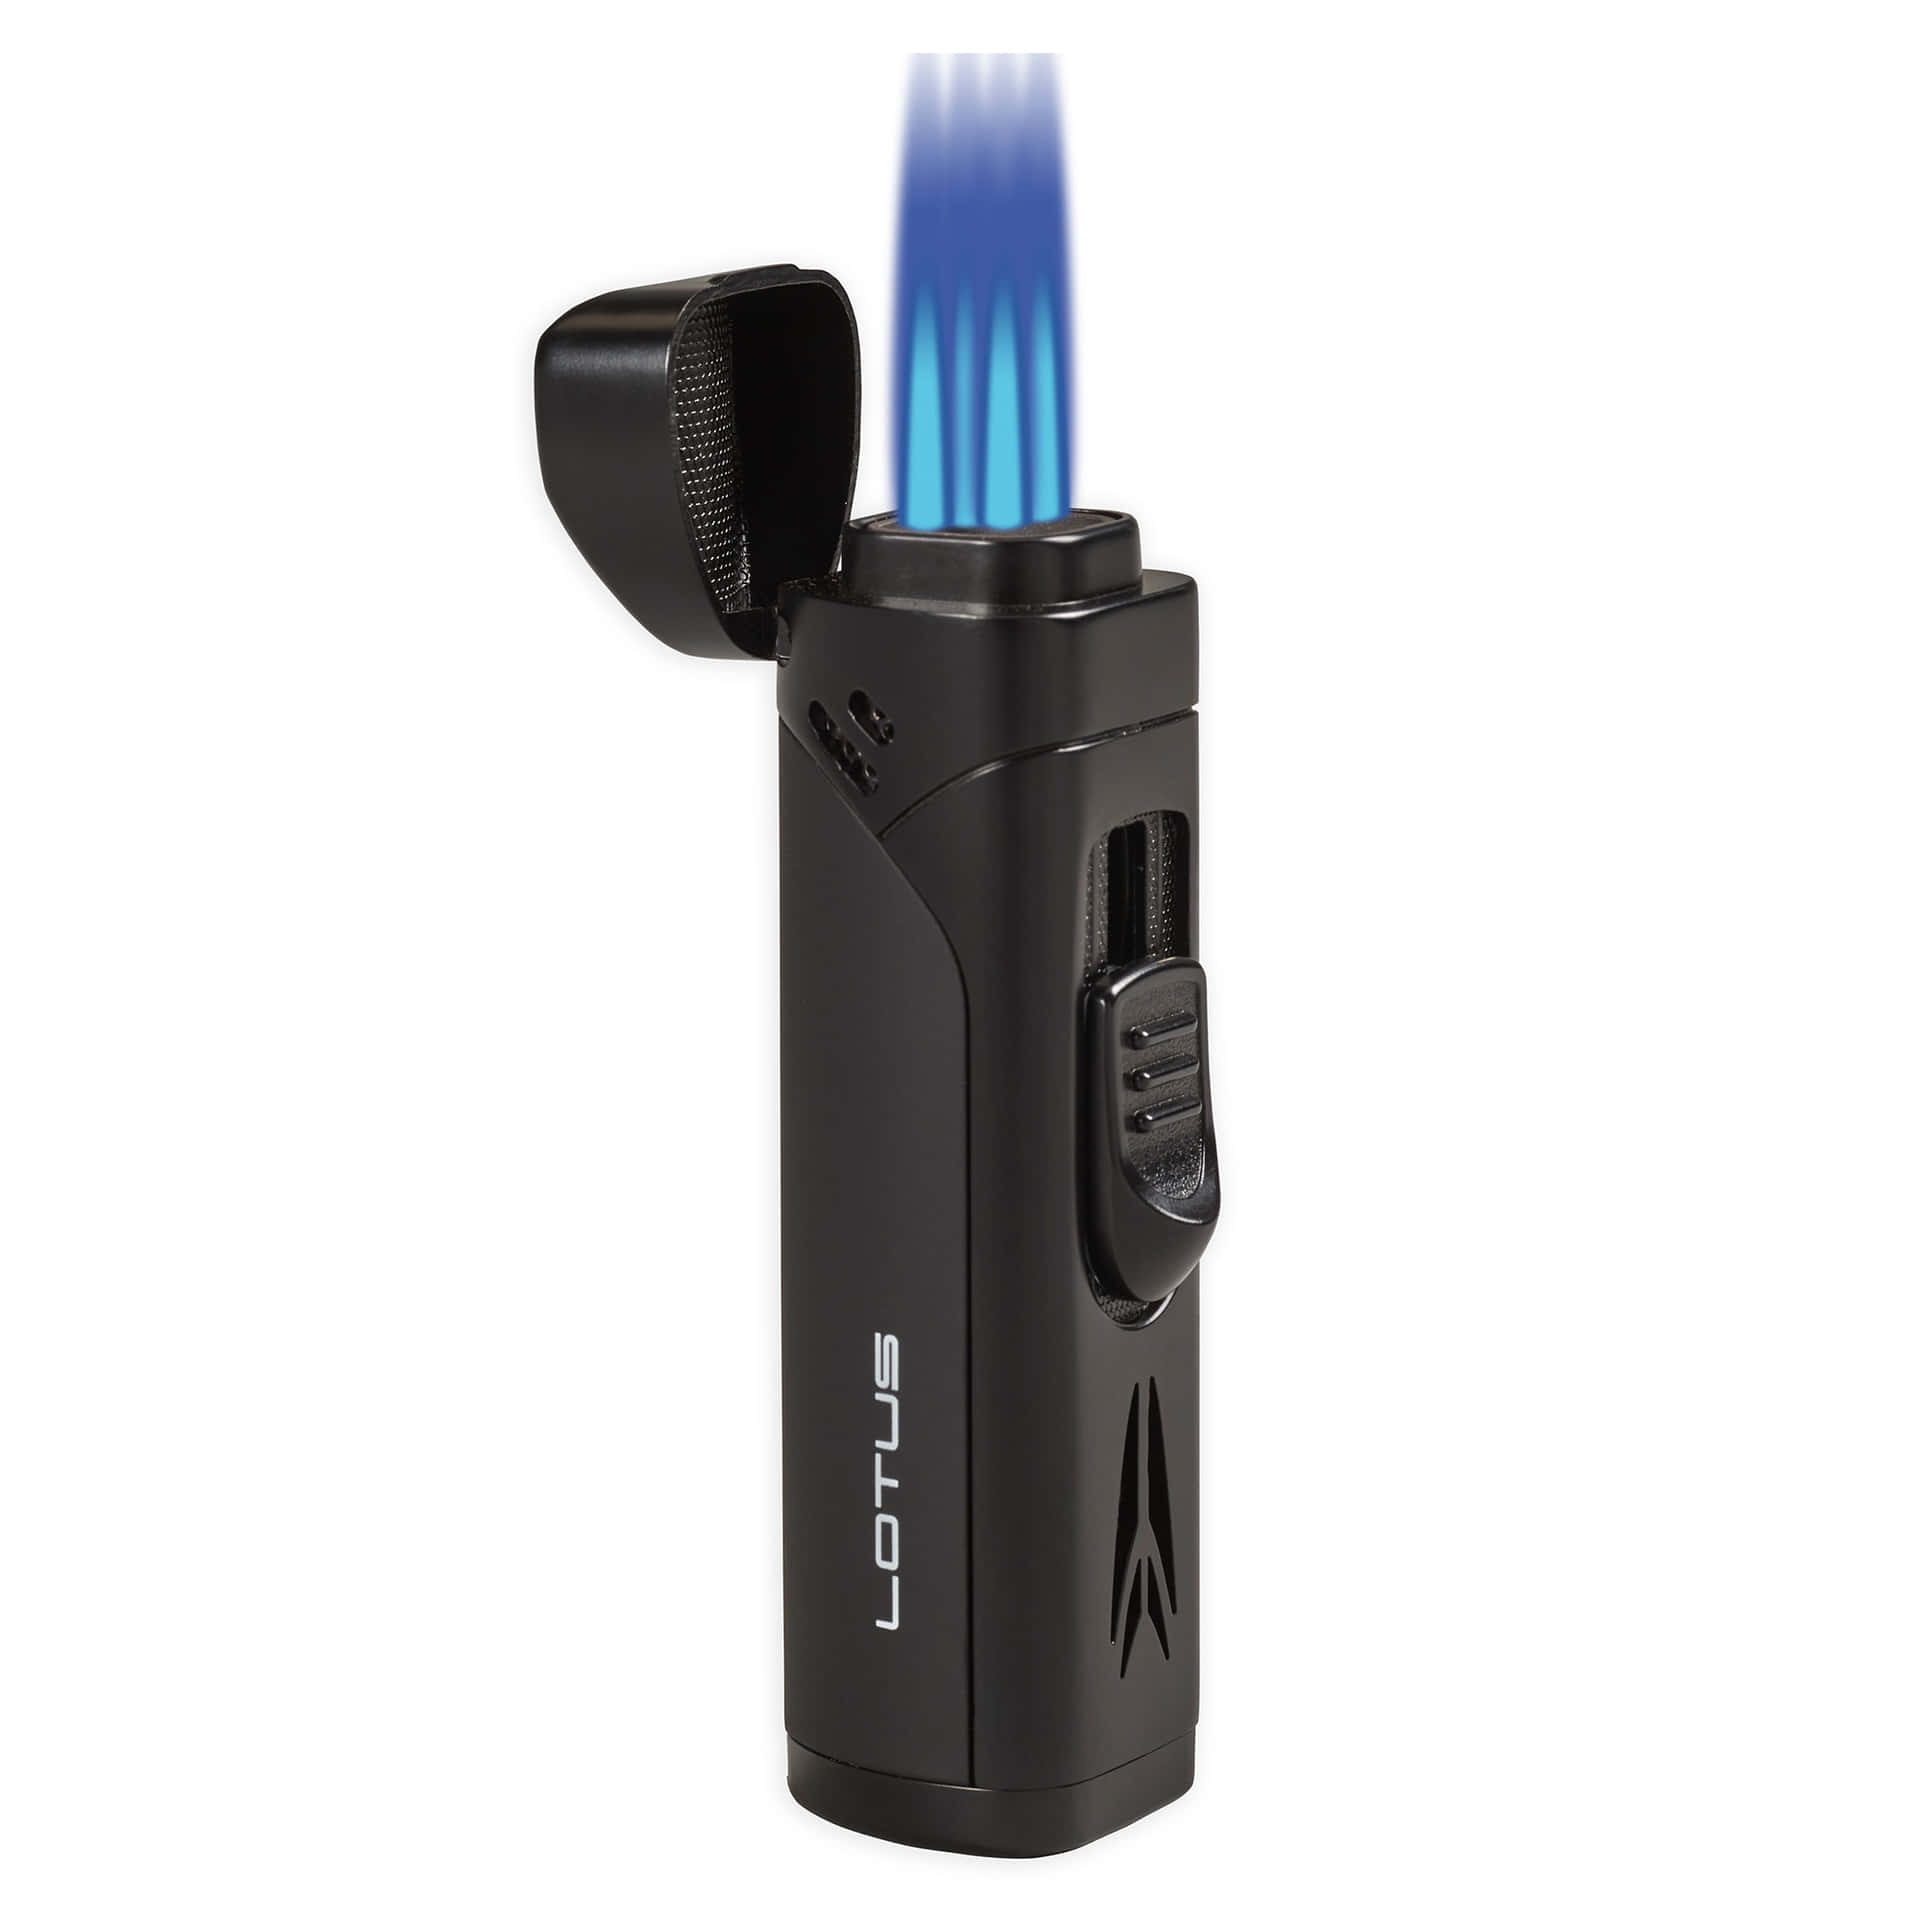 The bright and vibrant colors of this lighter will light up any room